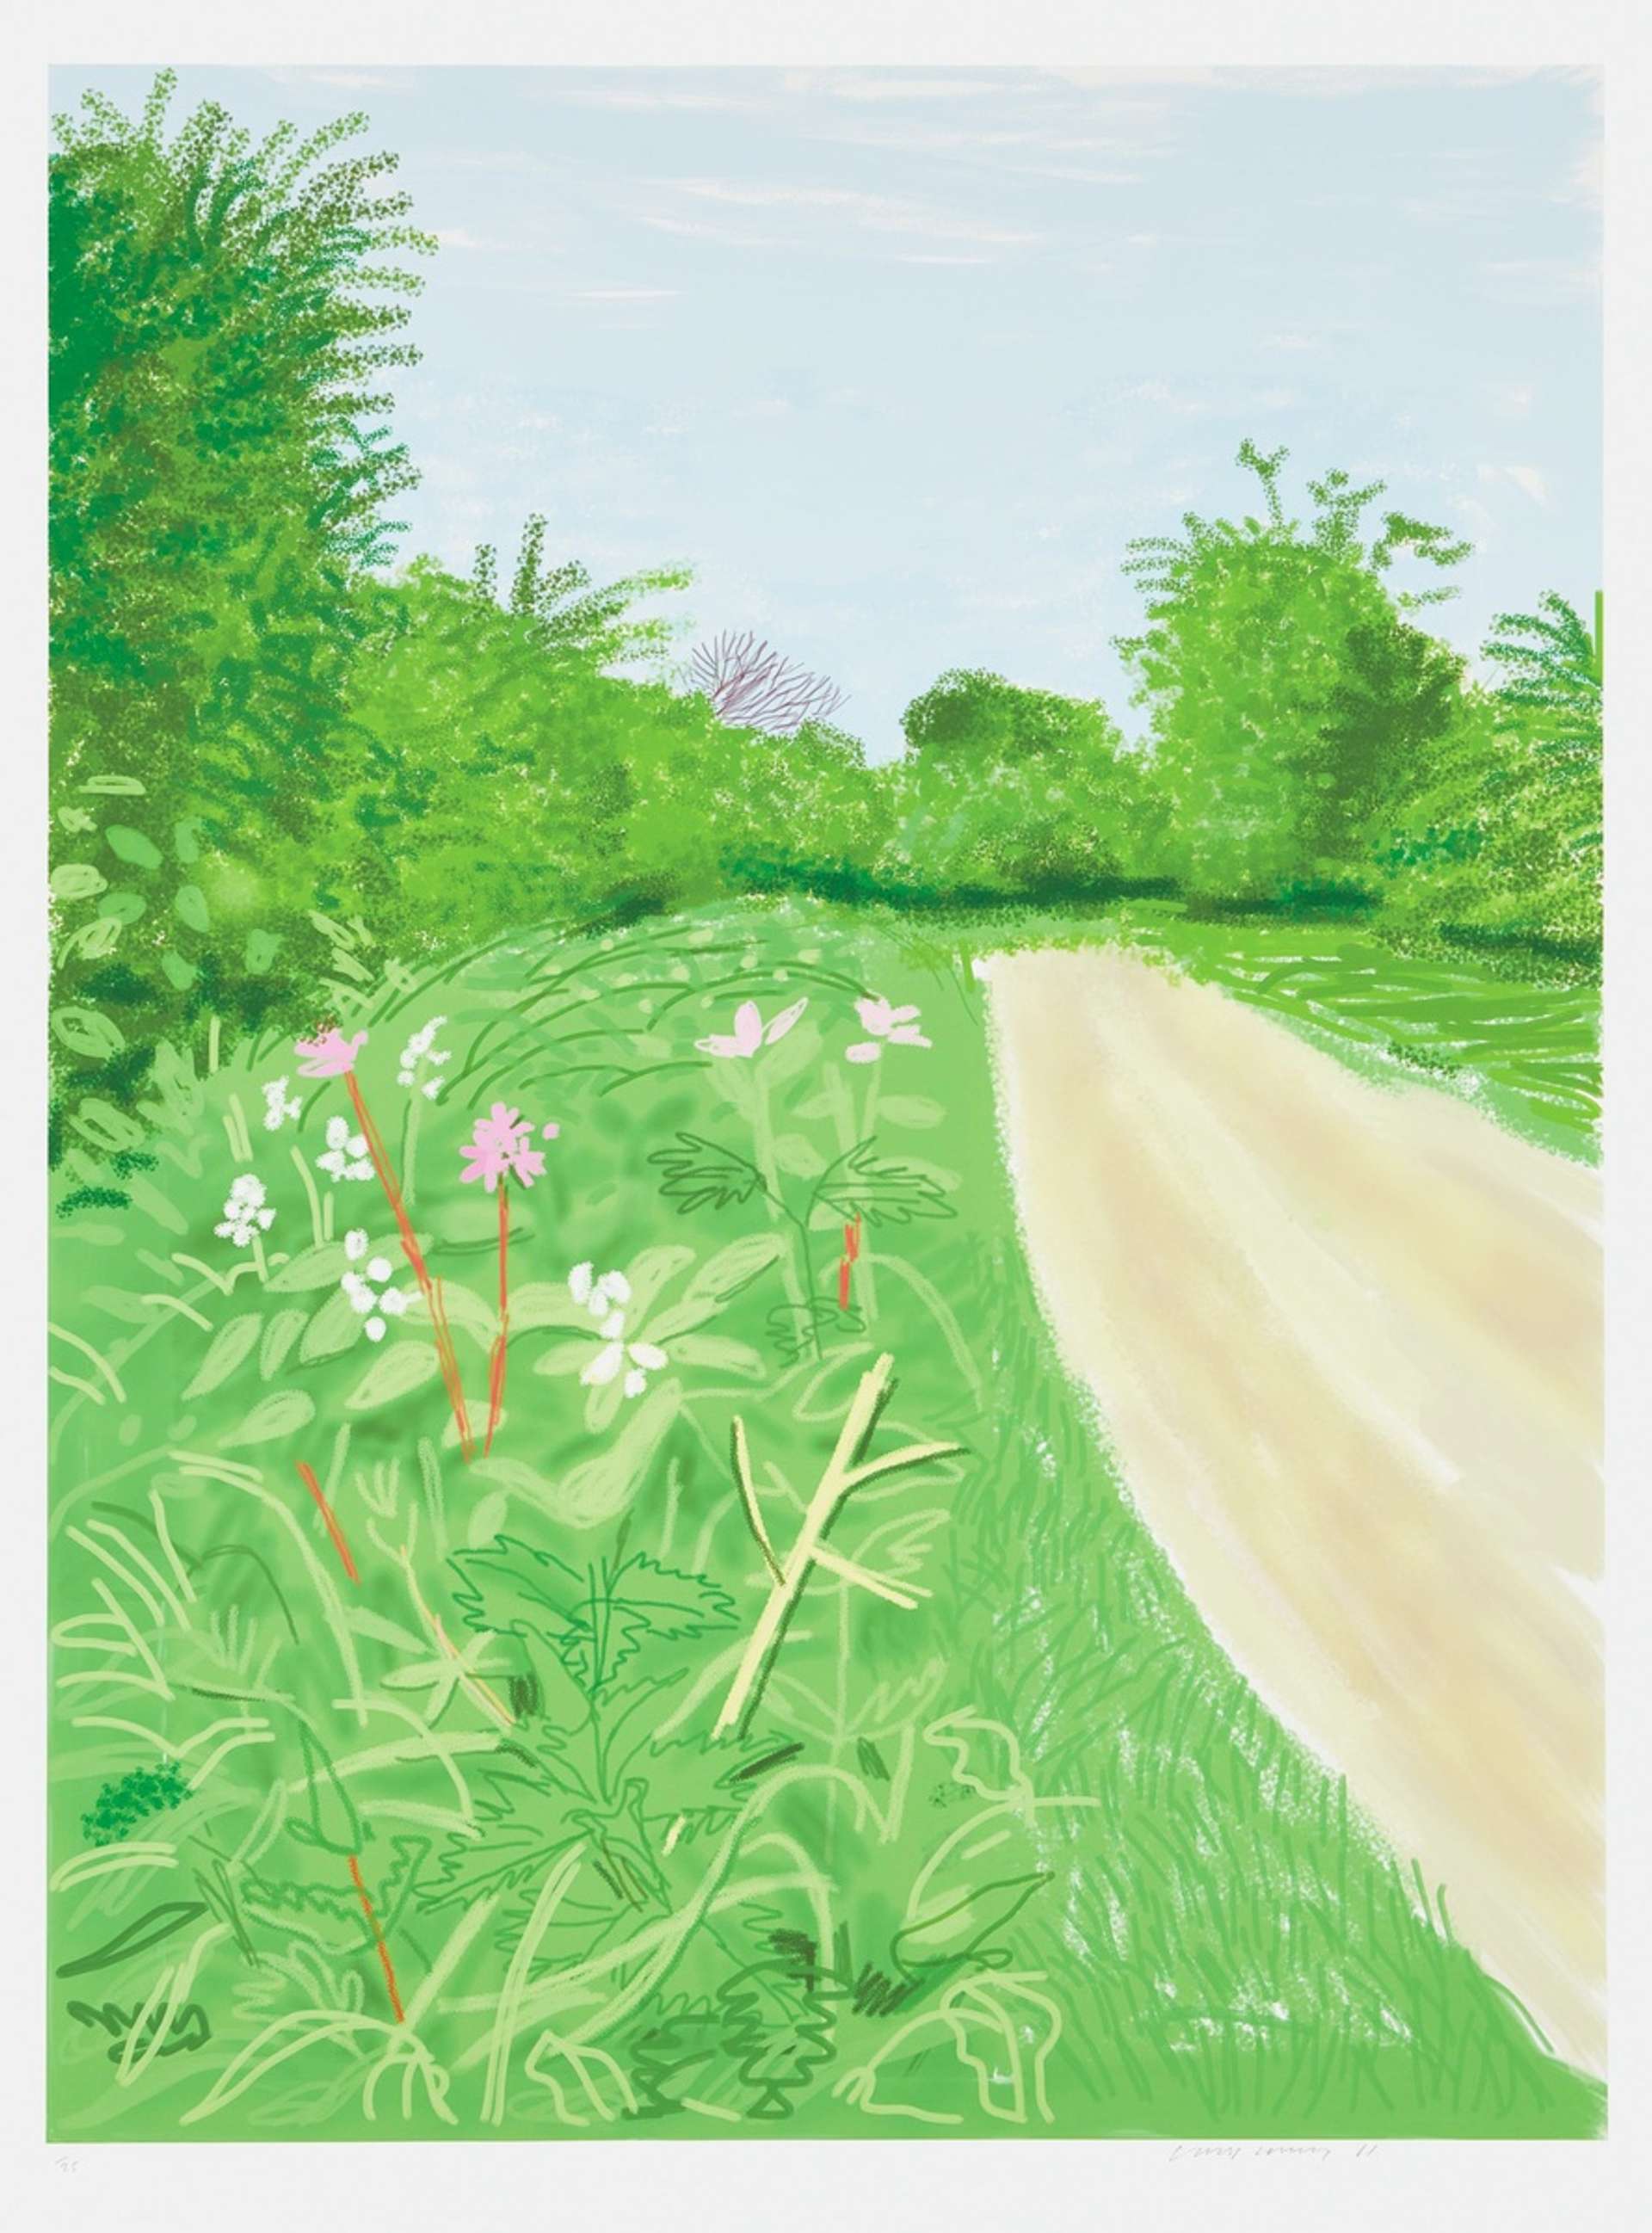 The Arrival Of Spring In Woldgate East Yorkshire 26th April 2011 by David Hockney